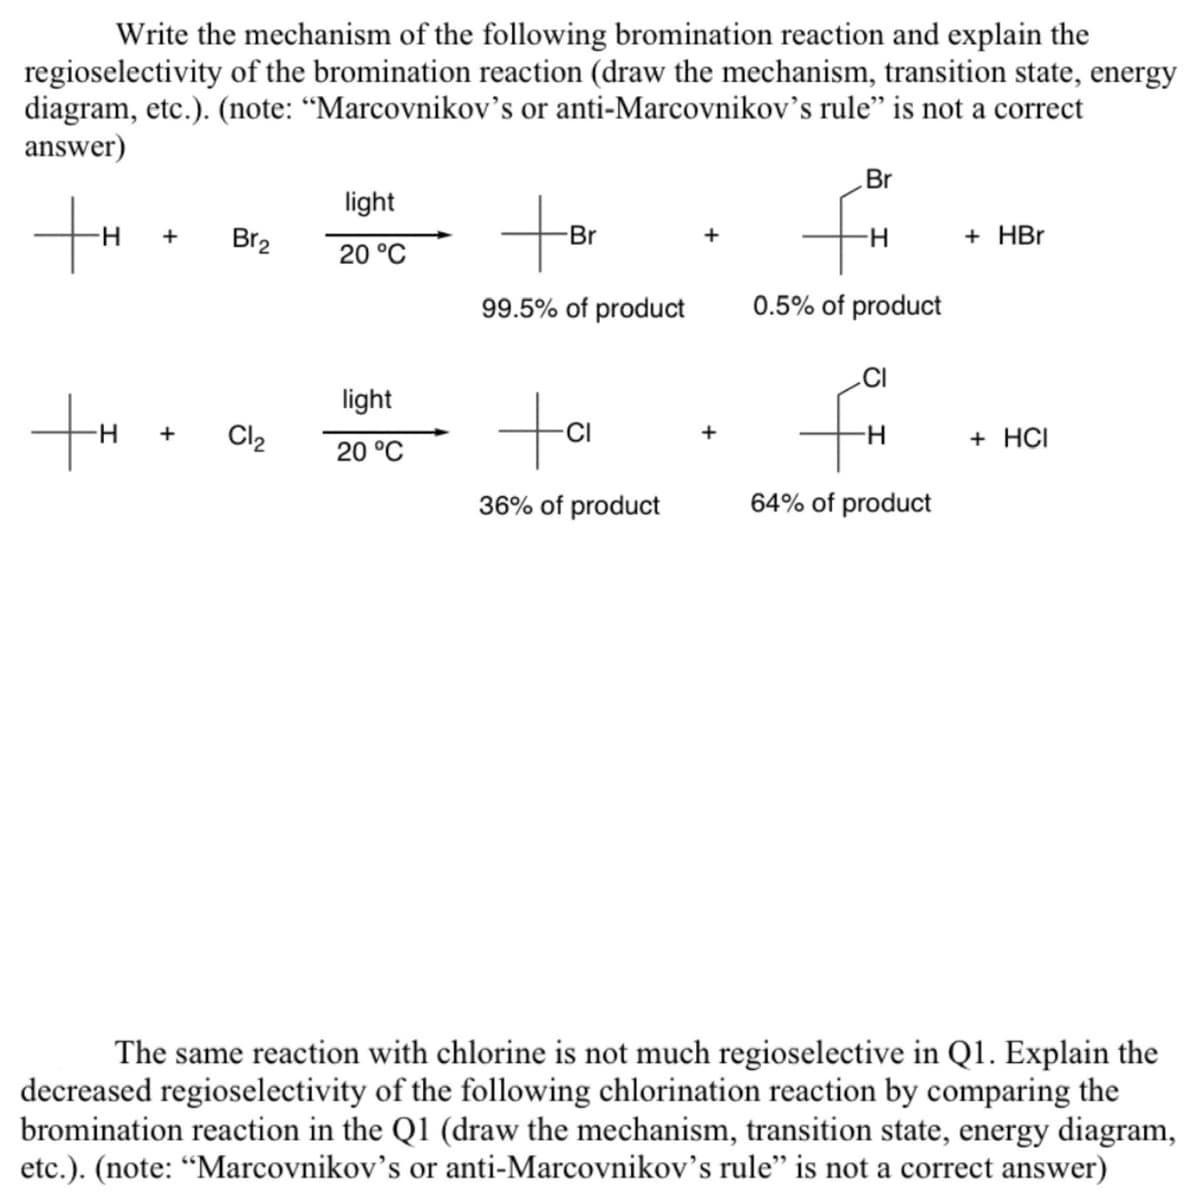 Write the mechanism of the following bromination reaction and explain the
regioselectivity of the bromination reaction (draw the mechanism, transition state, energy
diagram, etc.). (note: "Marcovnikov's or anti-Marcovnikov's rule" is not a correct
answer)
+H
+H
+
+
Br₂
Cl₂
light
20 °C
light
20 °C
to
-Br
99.5% of product
ta
36% of product
Br
-H
0.5% of product
fi
H
64% of product
+ HBr
+ HCI
The same reaction with chlorine is not much regioselective in Q1. Explain the
decreased regioselectivity of the following chlorination reaction by comparing the
bromination reaction in the Q1 (draw the mechanism, transition state, energy diagram,
etc.). (note: "Marcovnikov's or anti-Marcovnikov's rule" is not a correct answer)